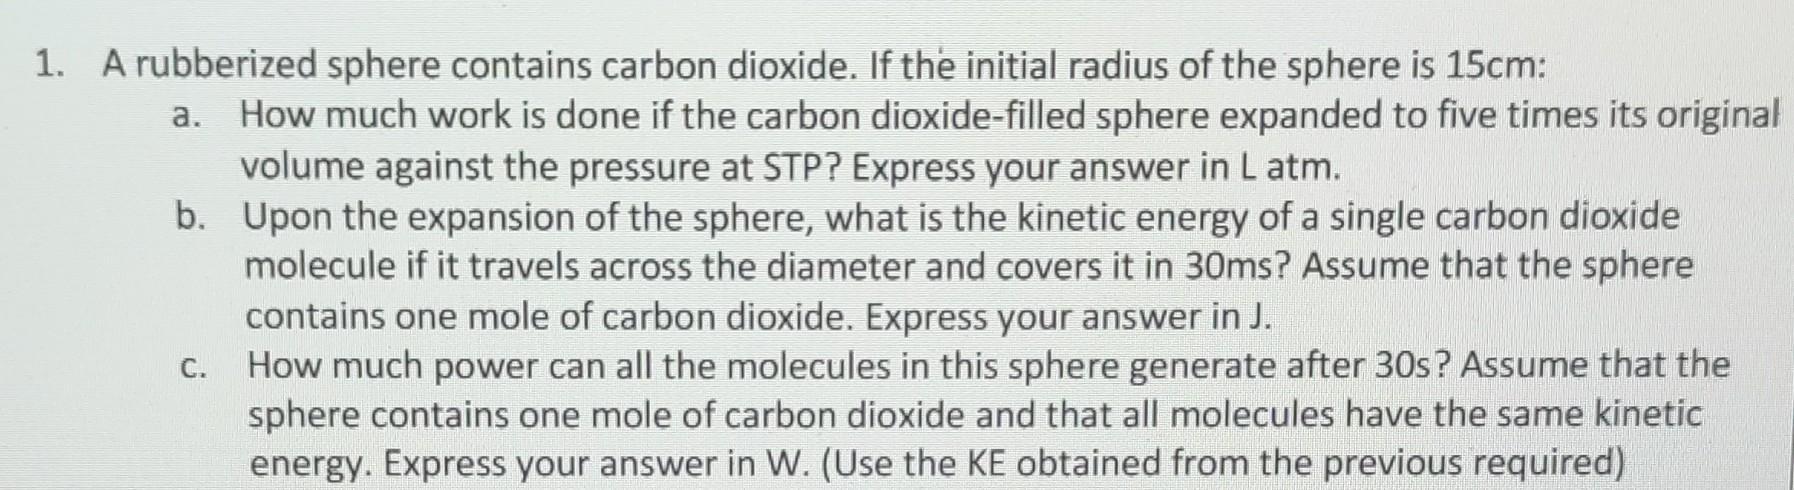 1. A rubberized sphere contains carbon dioxide. If the initial radius of the sphere is 15cm: a. How much work is done if the